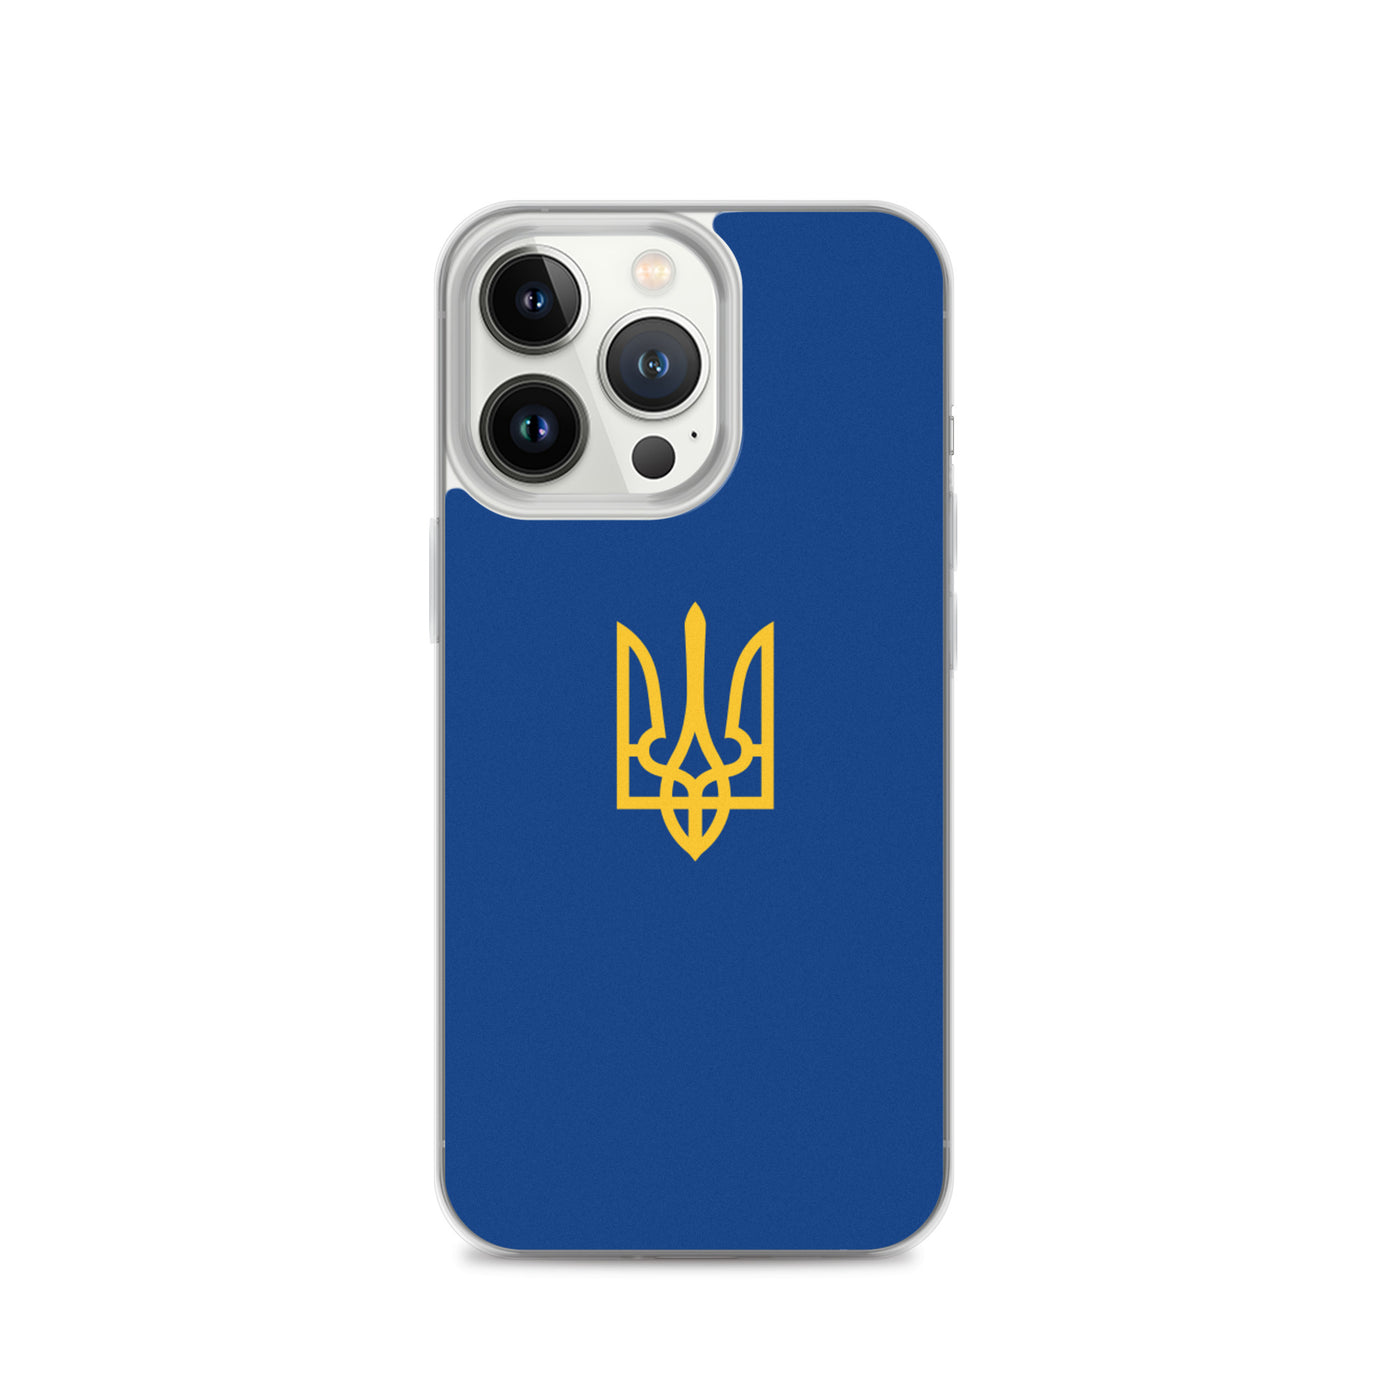 Trident of Freedom iPhone Case